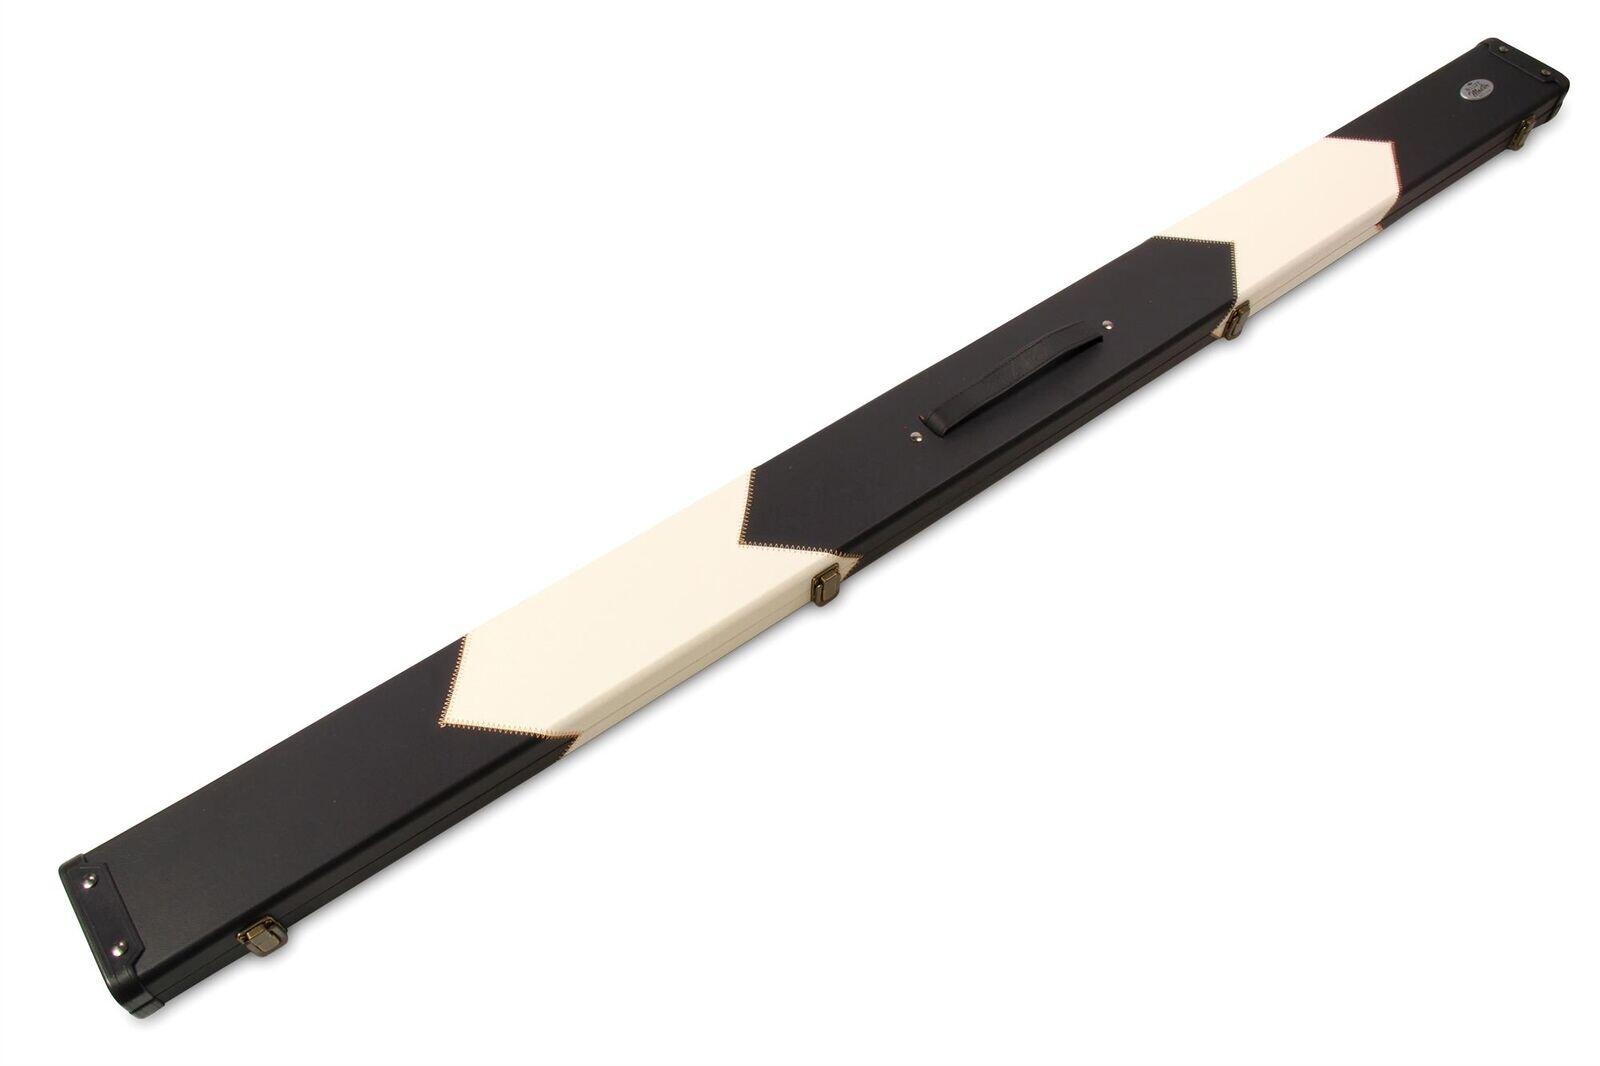 Baize Master 1 Piece WIDE WHITE ARROW Snooker Pool Cue Case - Holds 3 Cues 7/7